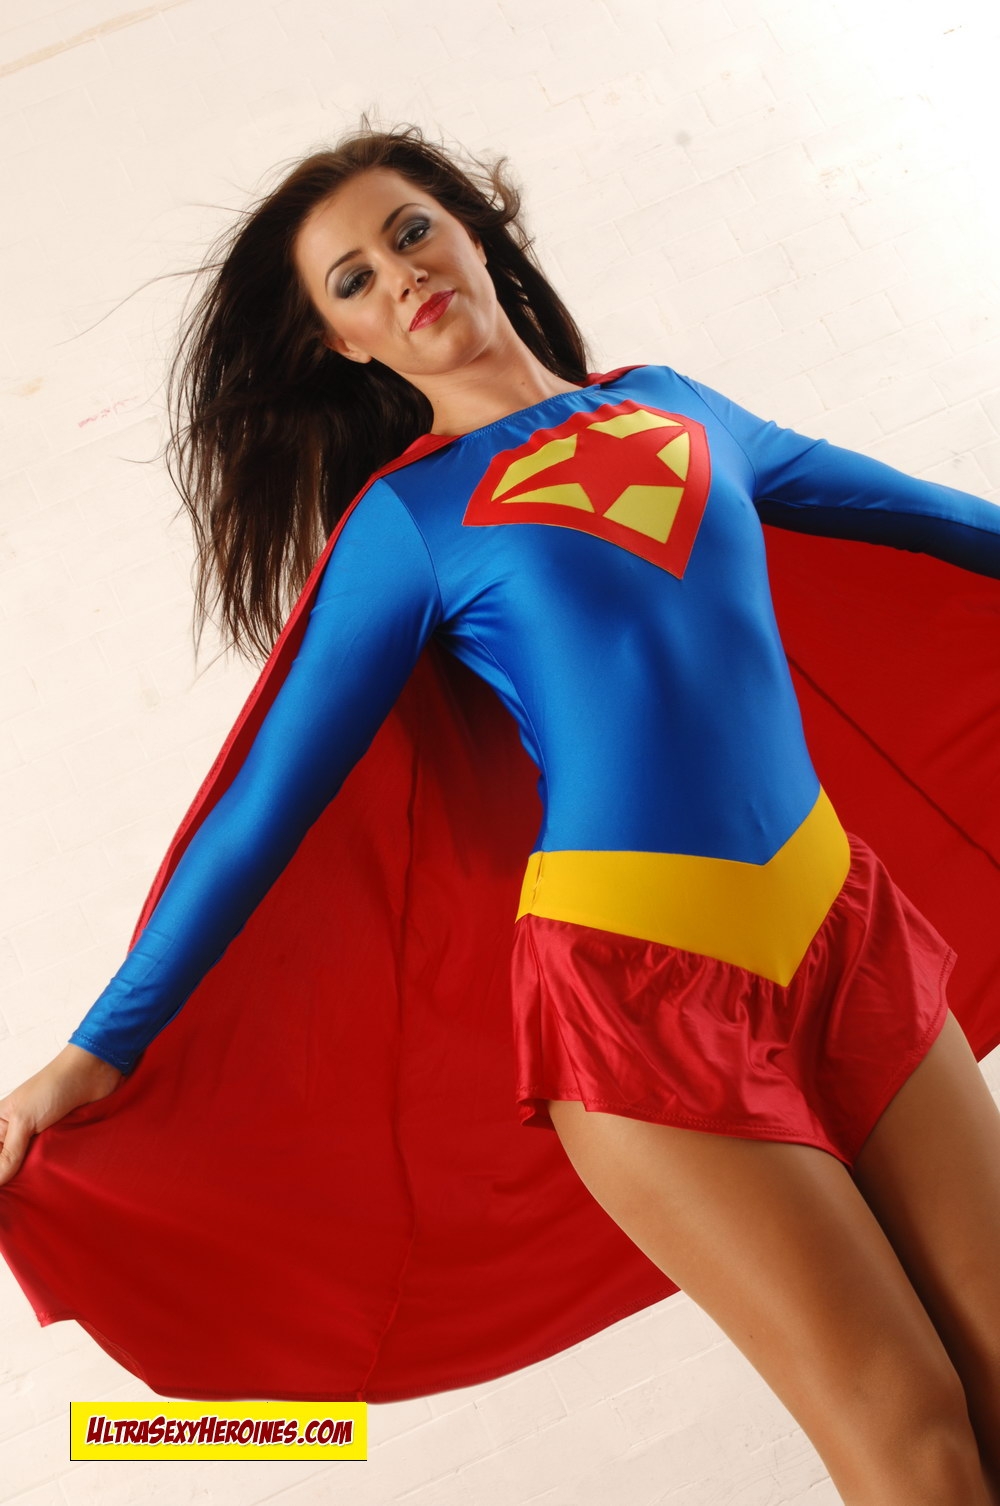 [UltraSexyHeroines] Super Heroine Cosplay Nude - Holly 67